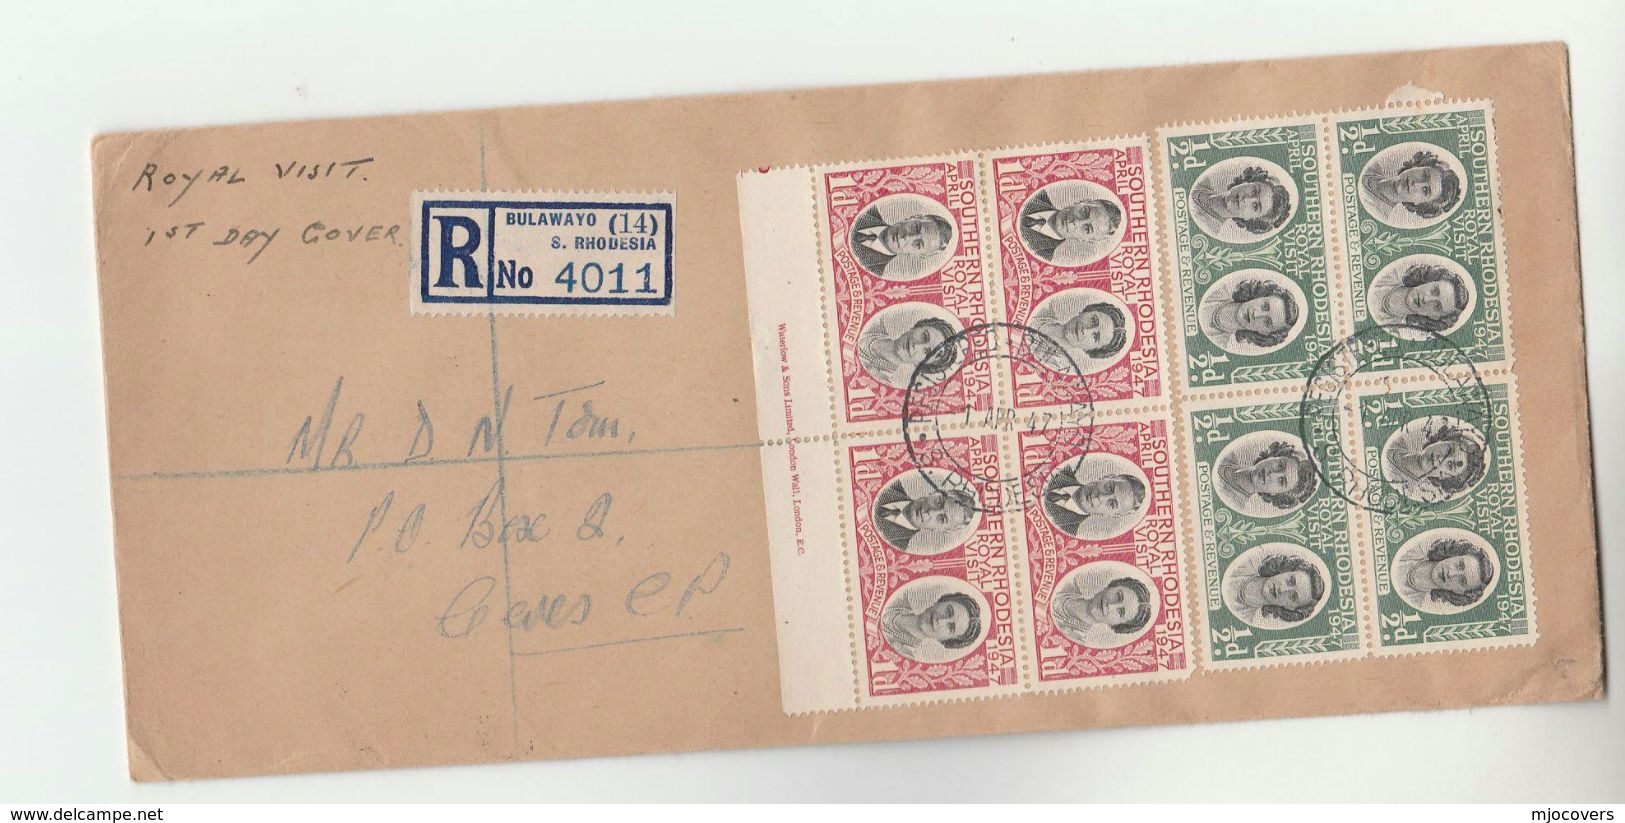 1947 REGISTERED Bulawayo To Ceres SOUTHERN  RHODESIA FDC Blocks Of 4 ROYAL VISIT Stamps Cover Royalty - Southern Rhodesia (...-1964)